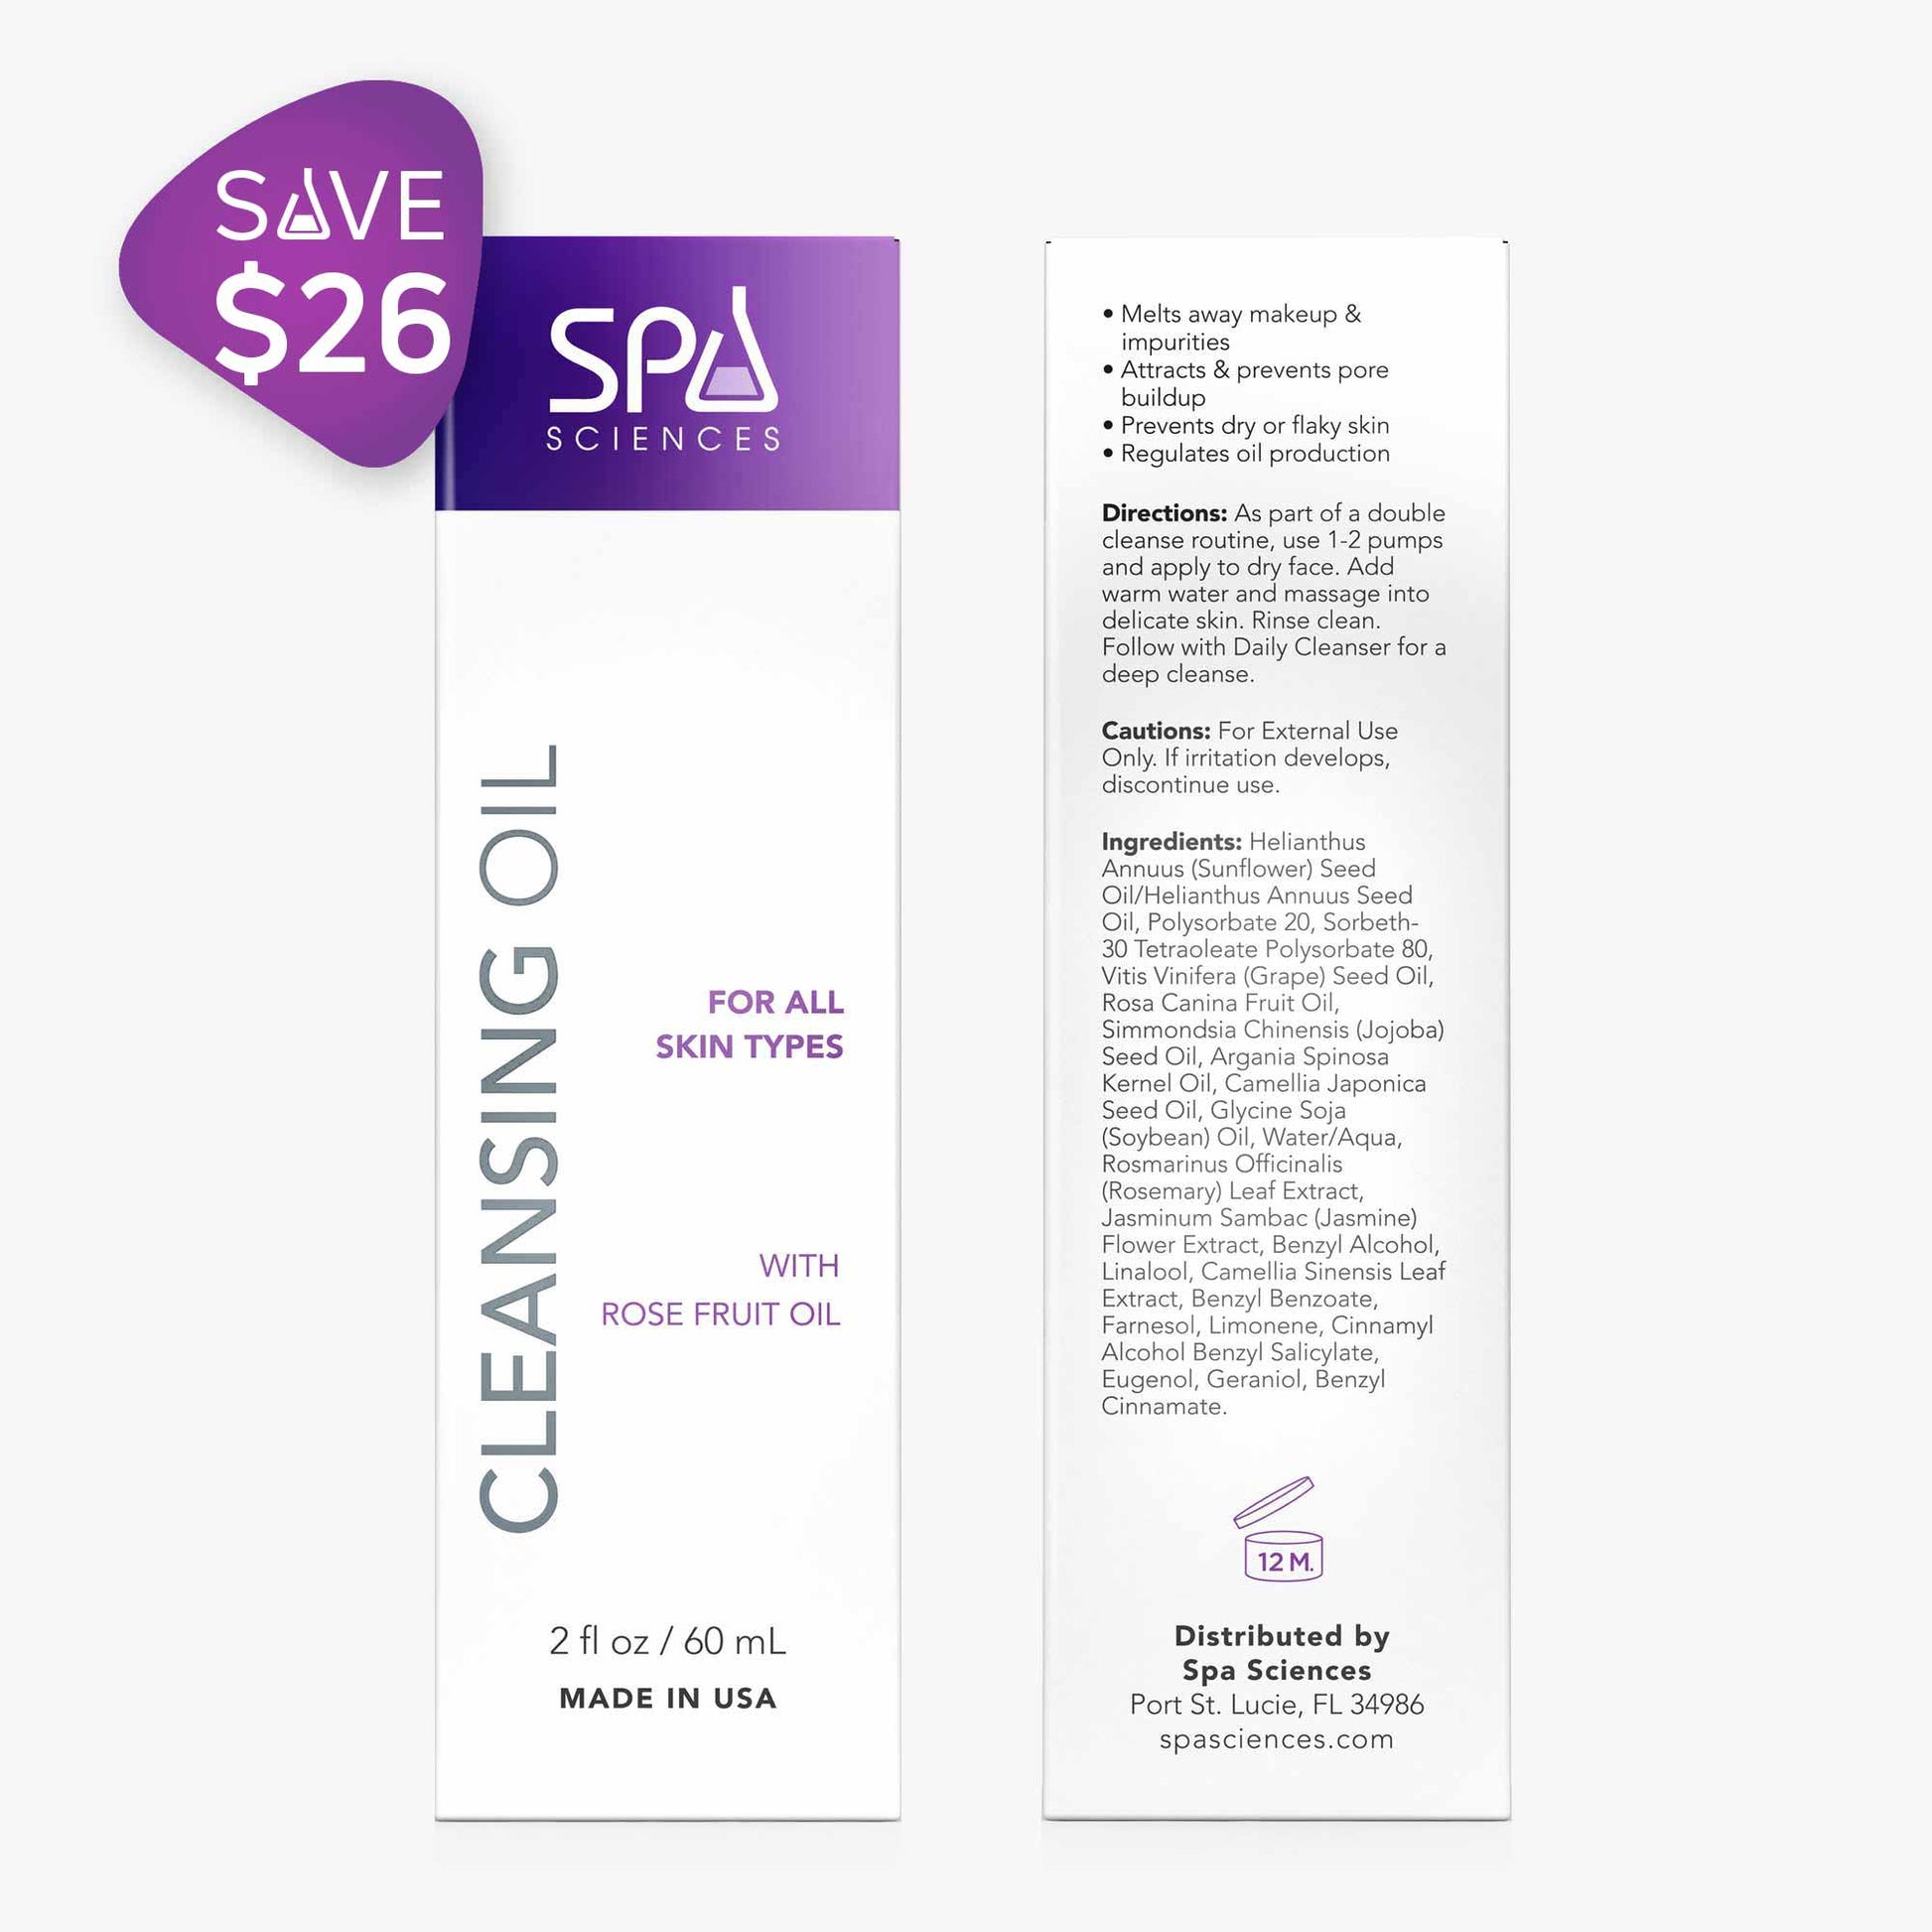 A bottle of Spa Sciences' Hydration Hero cleansing oil on a white background.